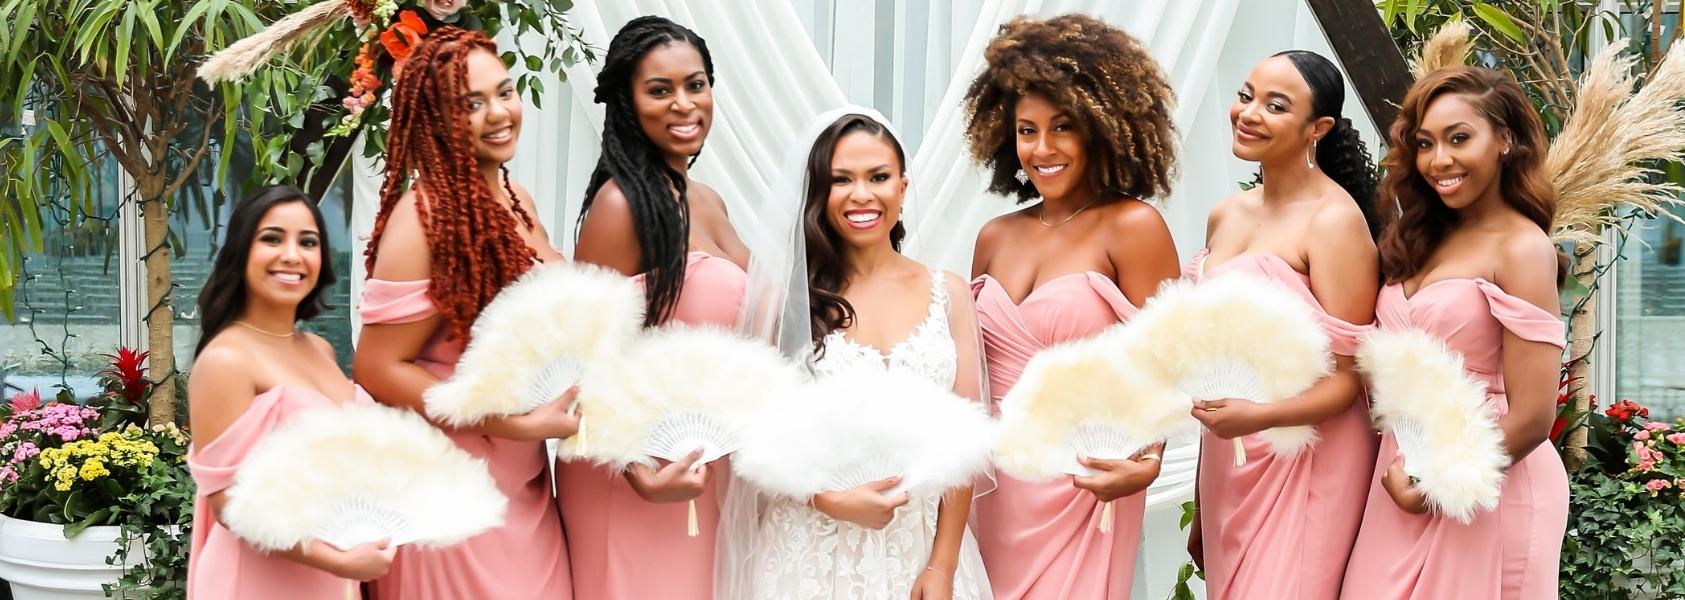 How These Bridesmaids Exceeded Expectations